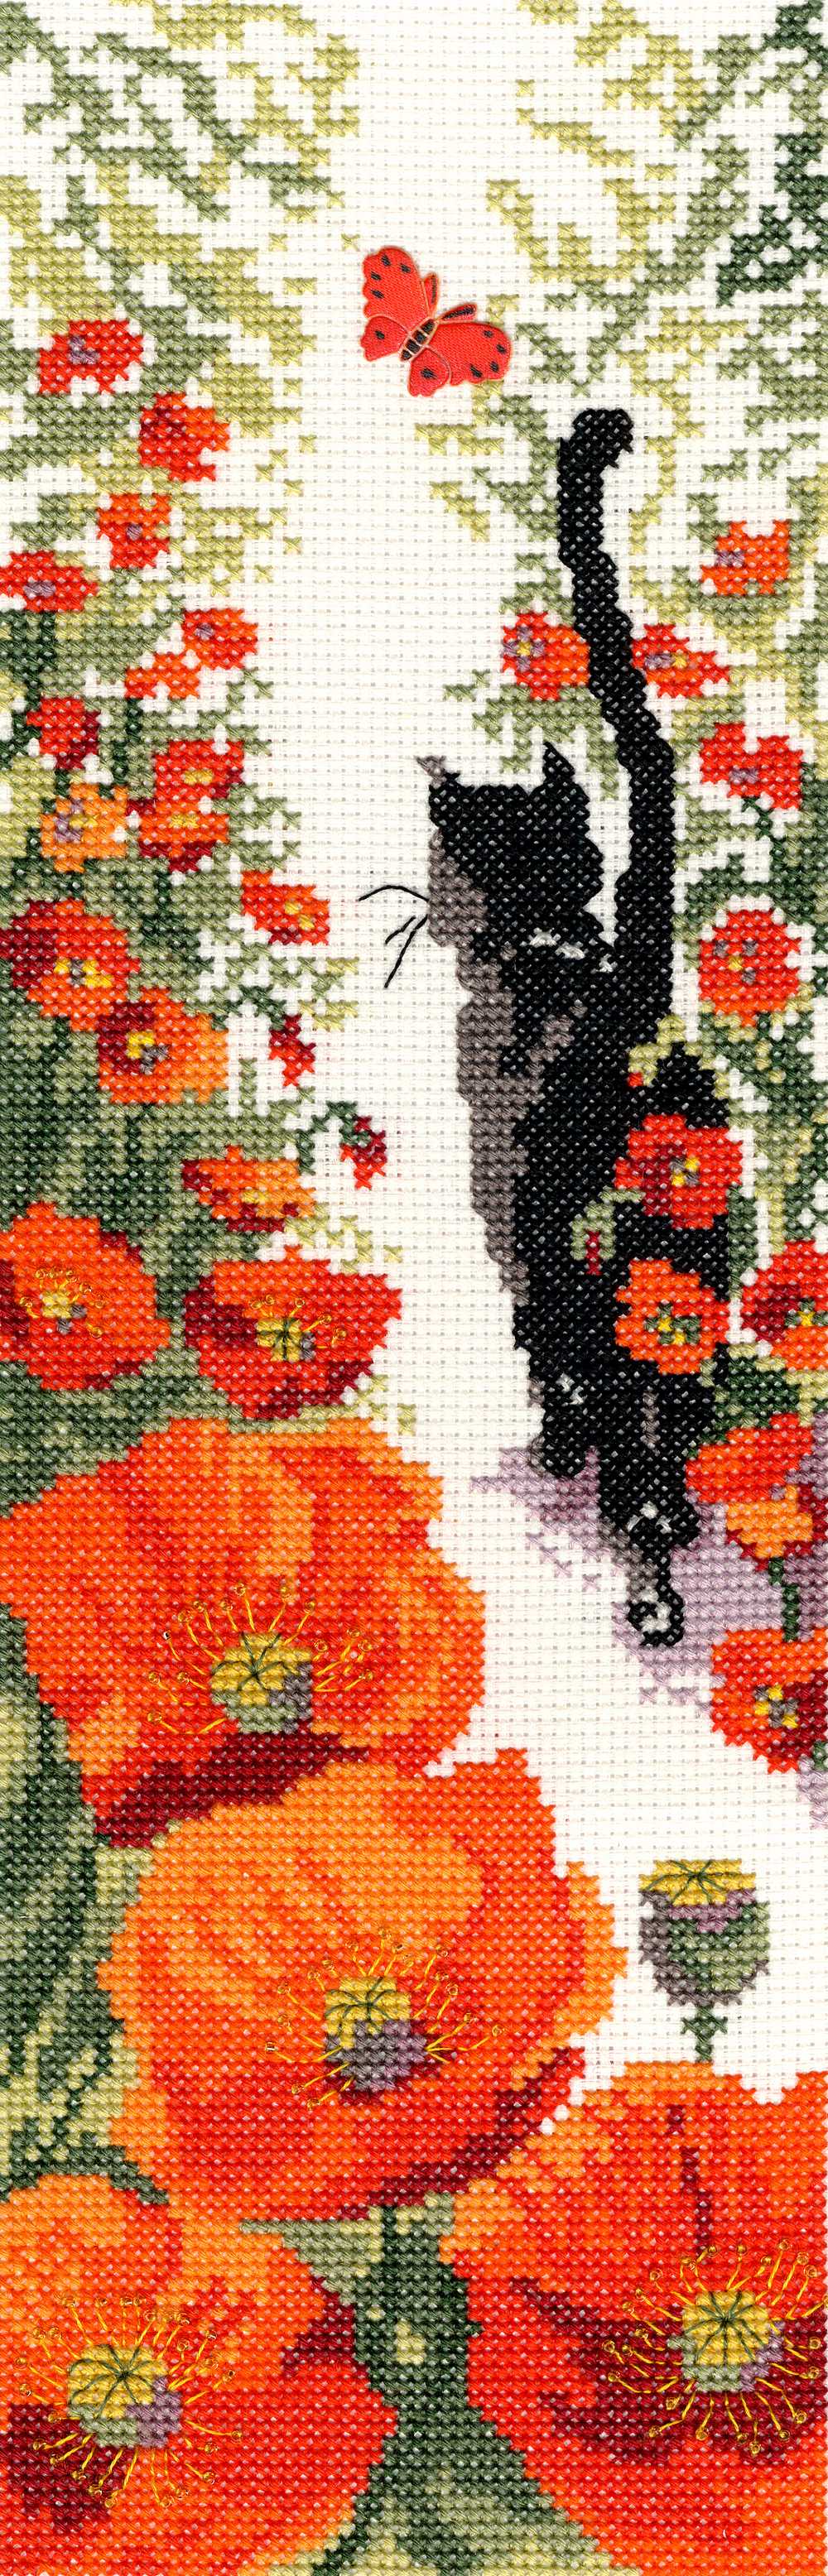 Follow Me 3 Cats Cross Stitch Kit From Bothy Threads